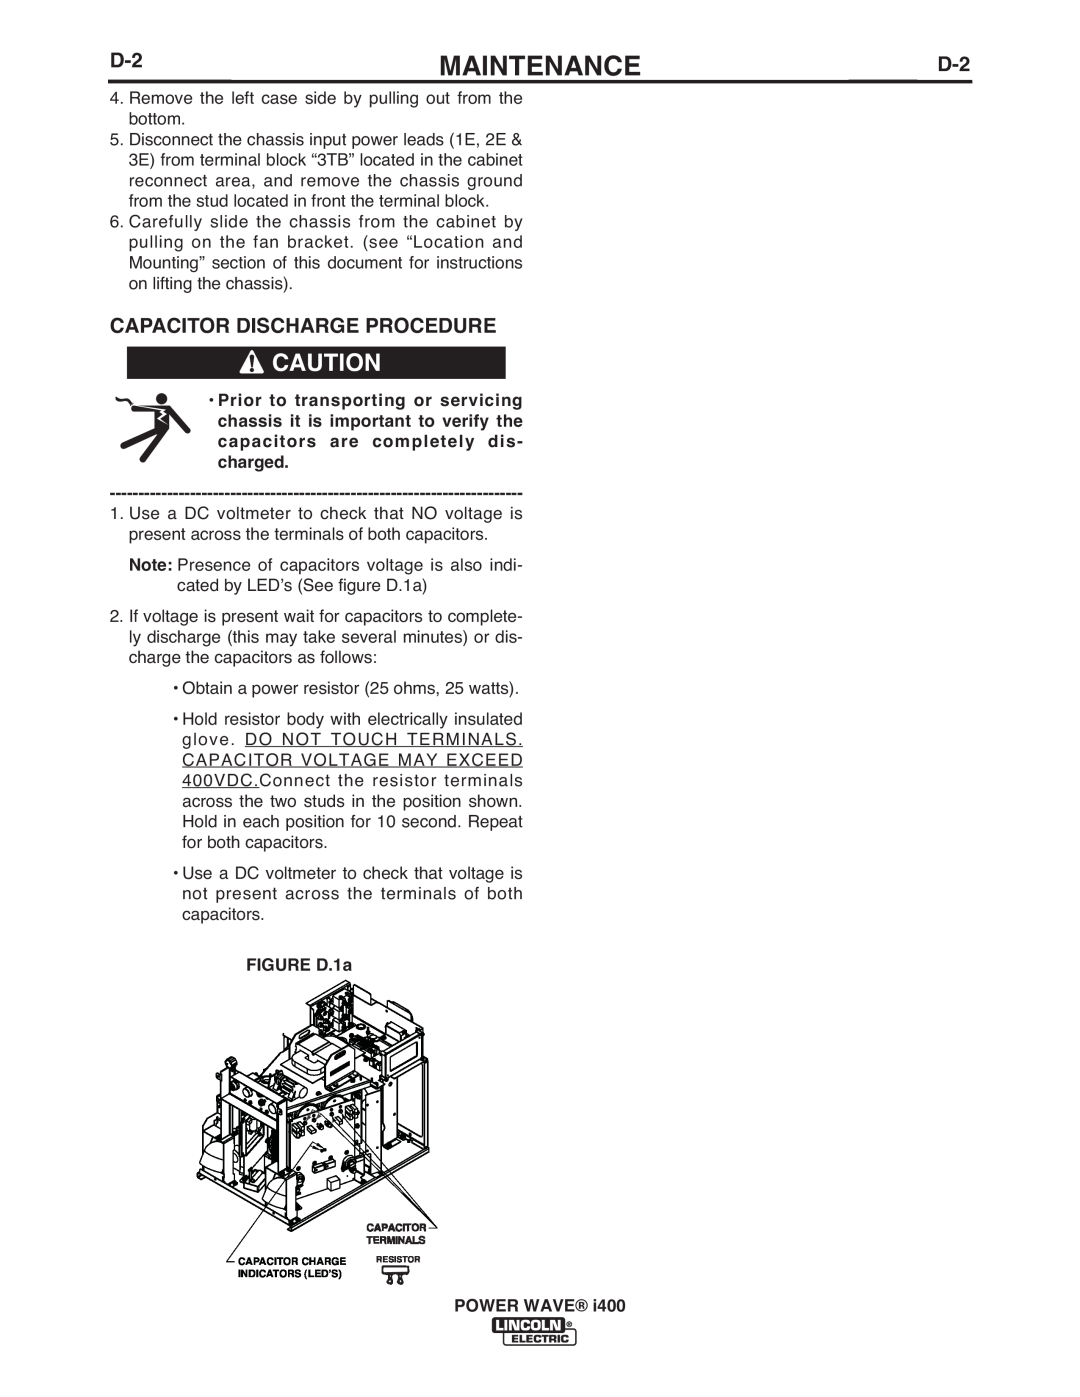 Lincoln Electric IM986 manual Capacitor Discharge Procedure, Maintenance 